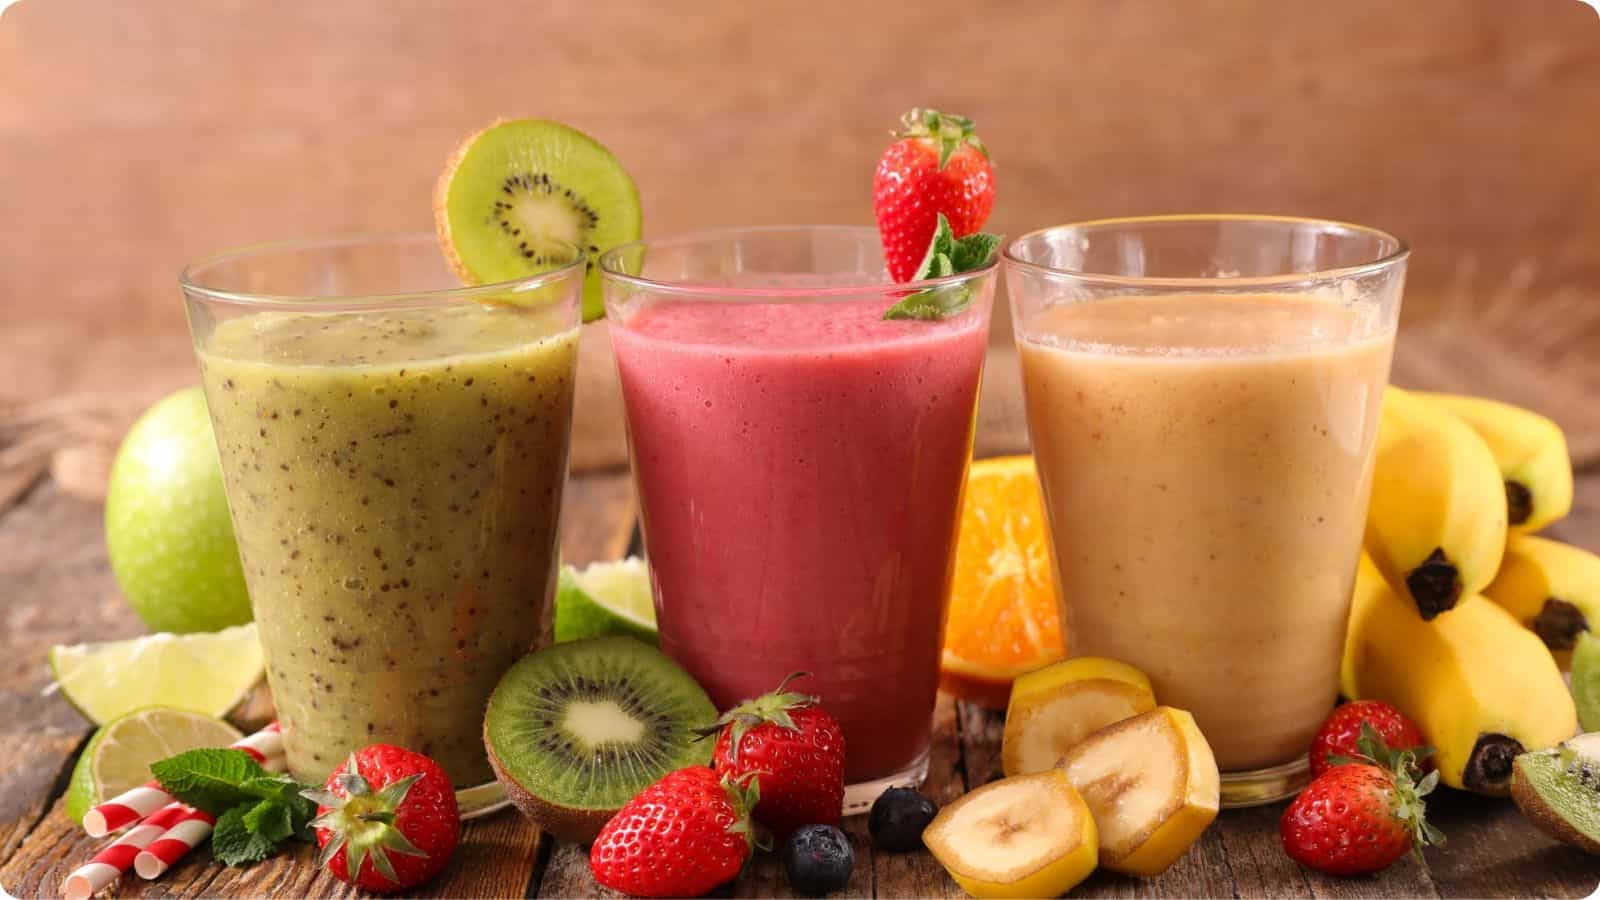 Glasses of smoothies flavored with kiwi, strawberry, and banana, presented on a wooden table